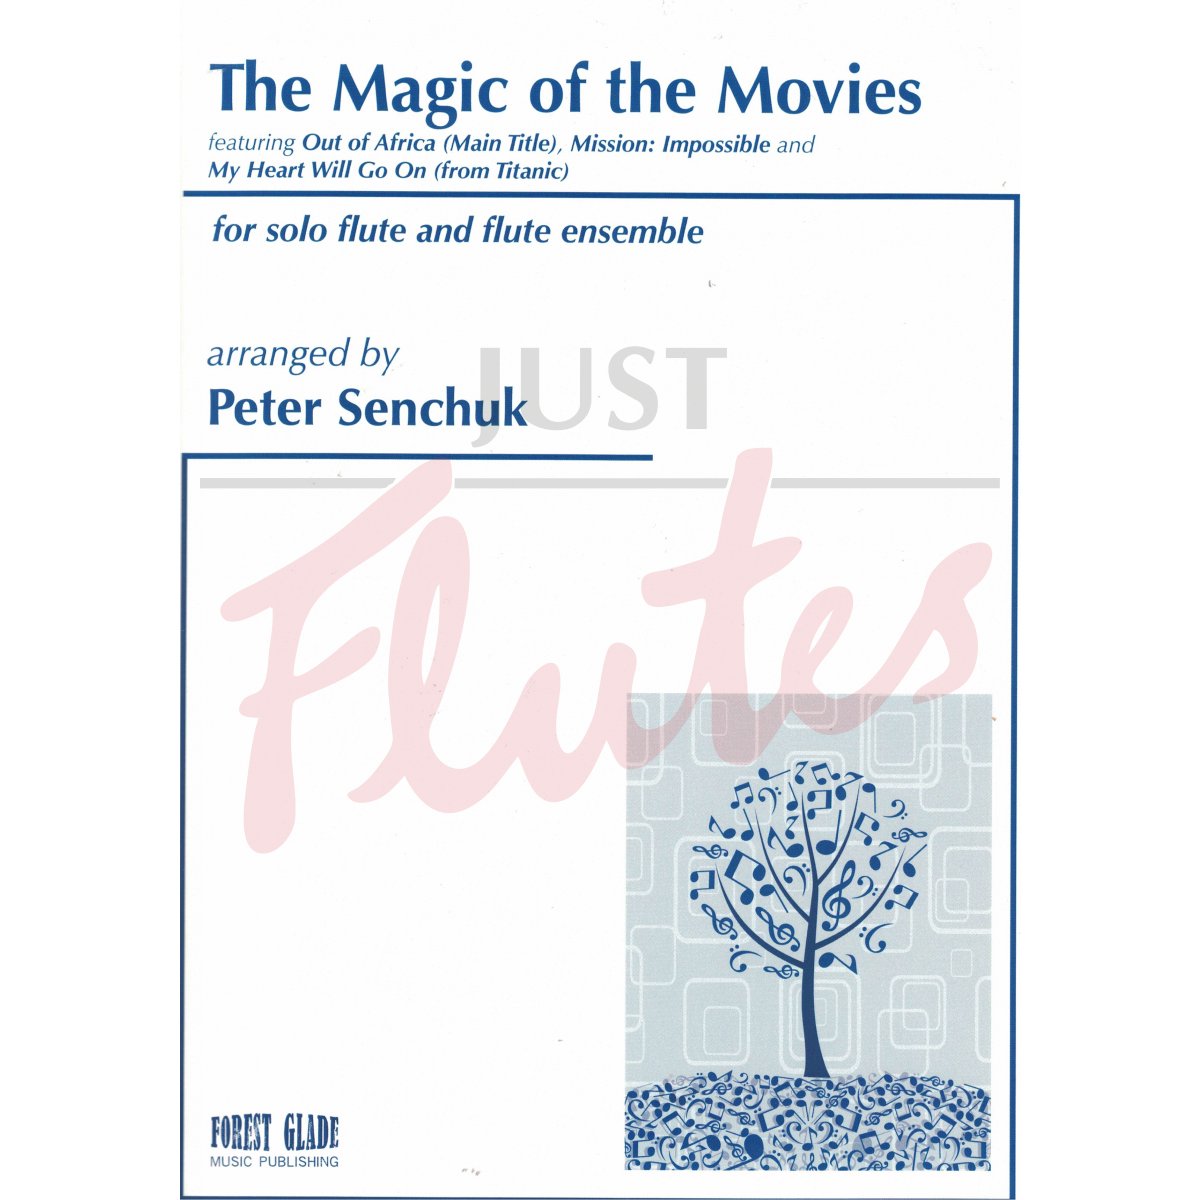 The Magic of the Movies for solo flute and flute ensemble